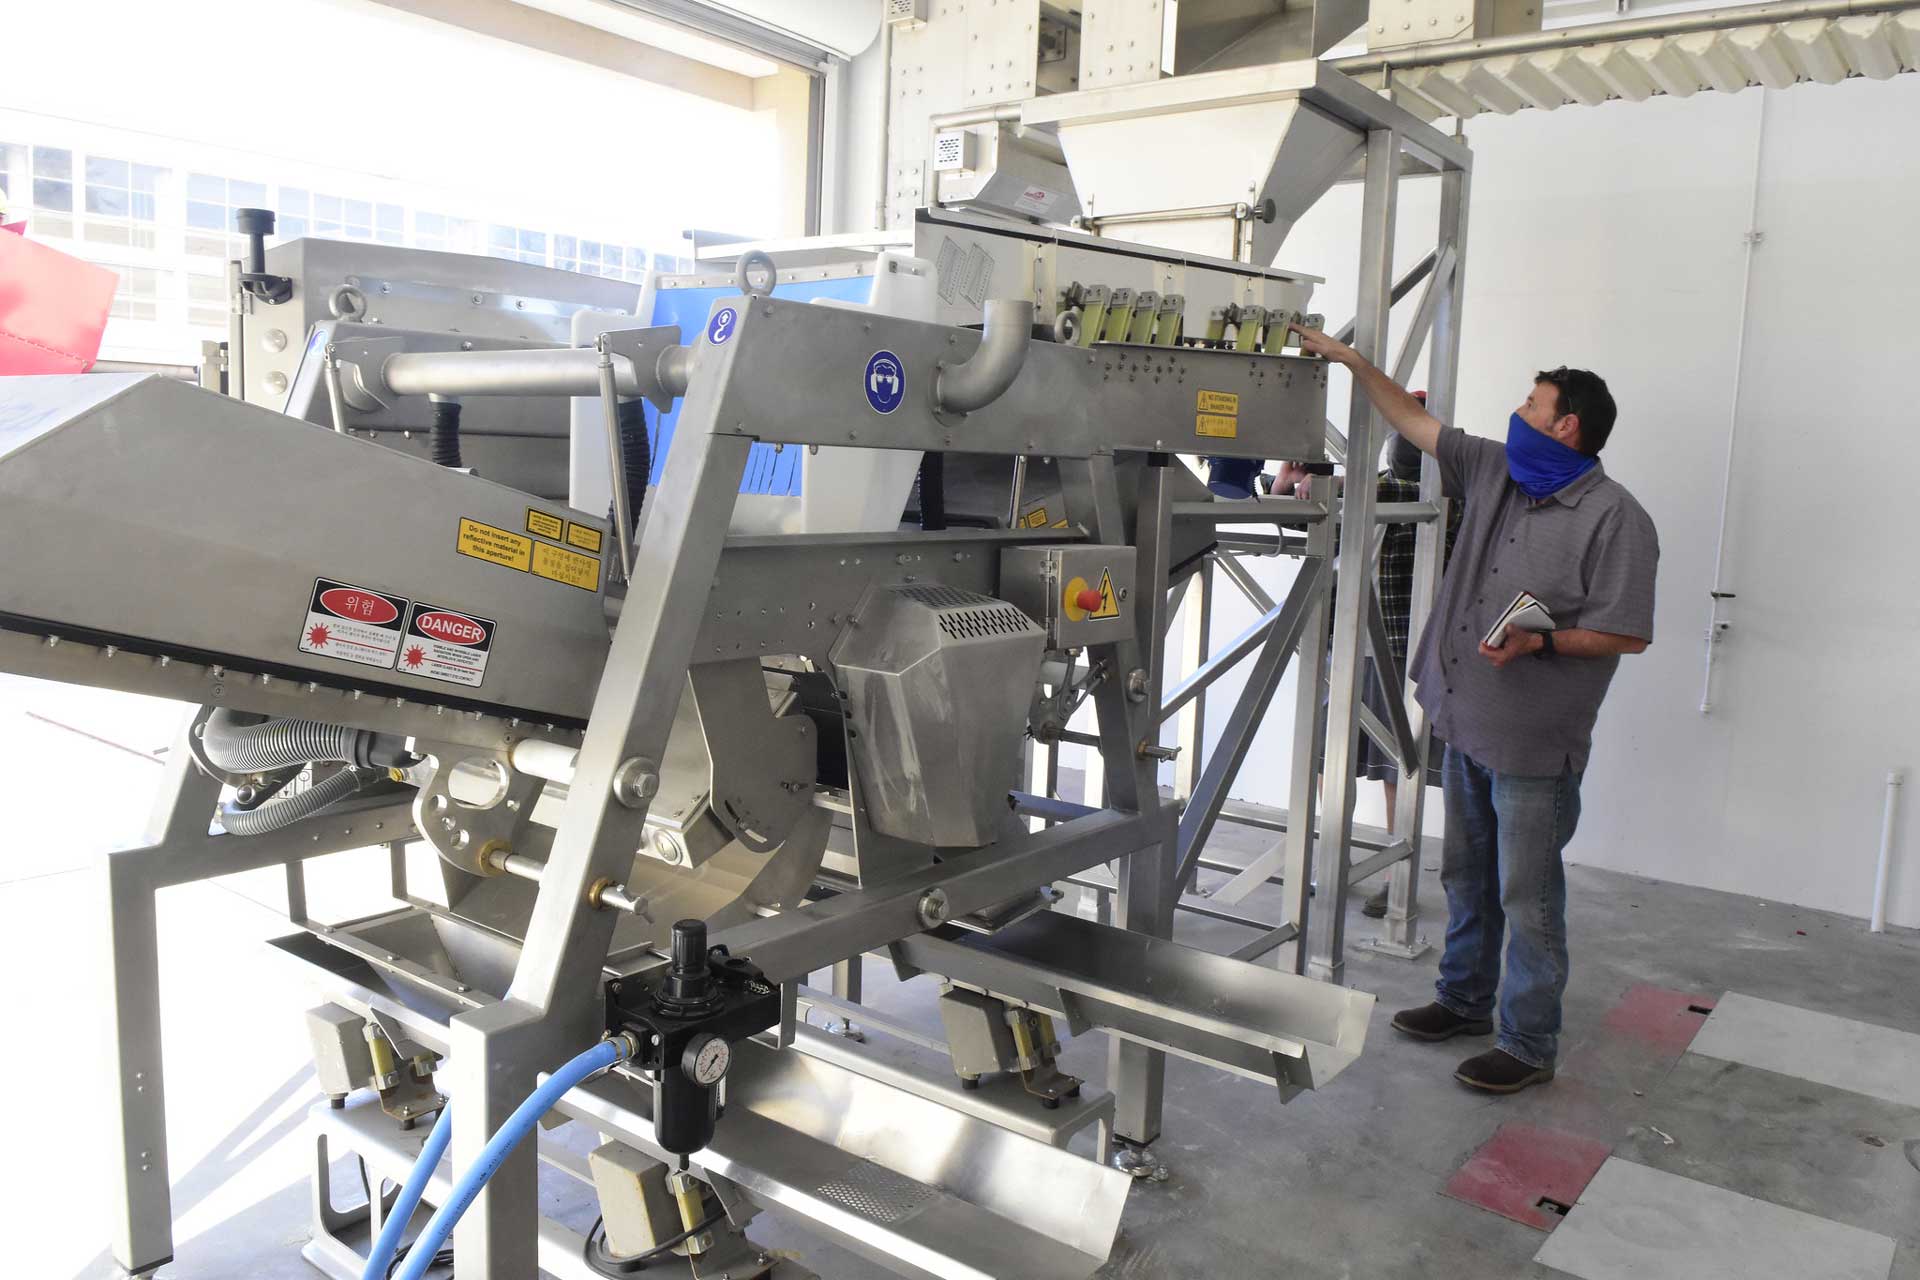 1-1-1-processing-equipment-courtesy-Jordan-College-of-Agricultural-Sciences-and-Technology,-Fresno-State-S